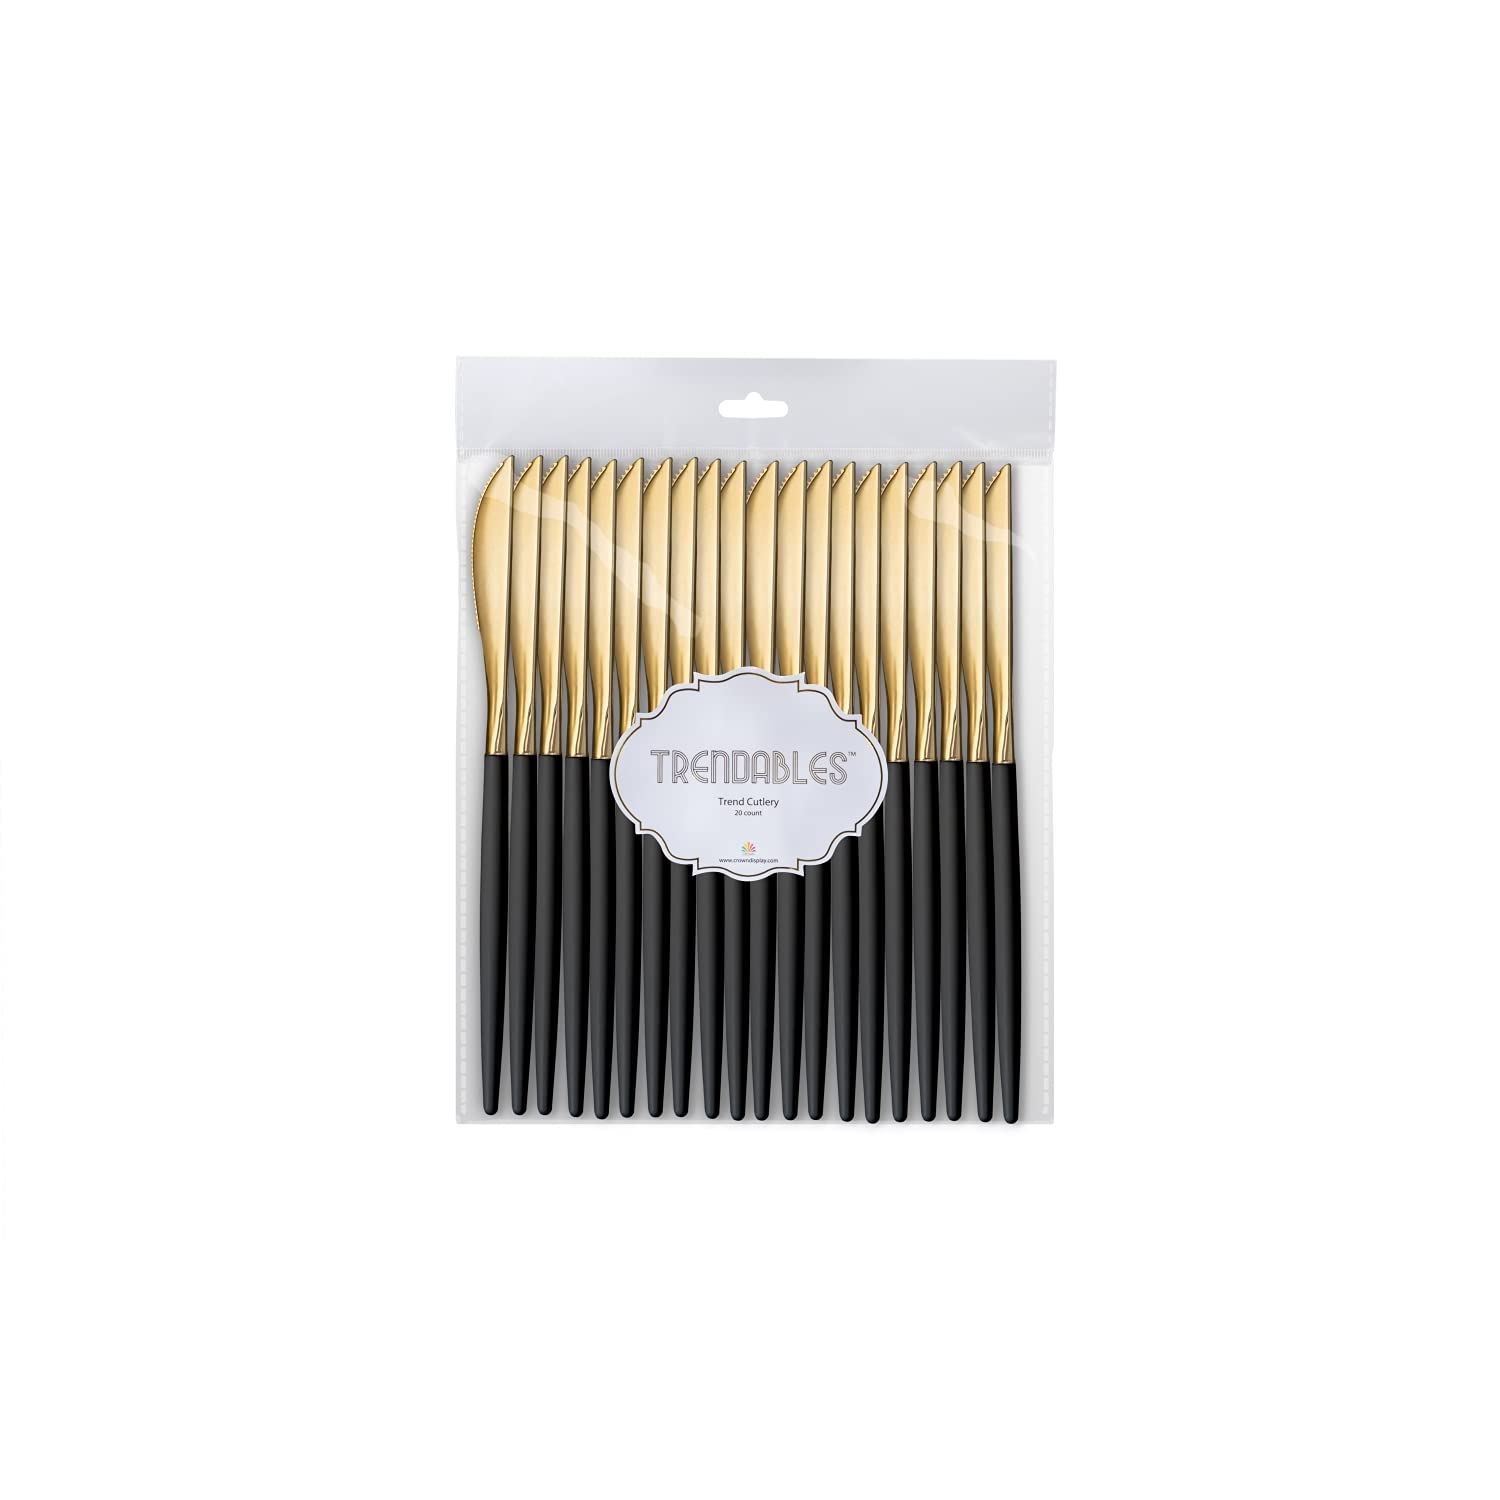 Trendables Knives Black/Gold | 20 Count